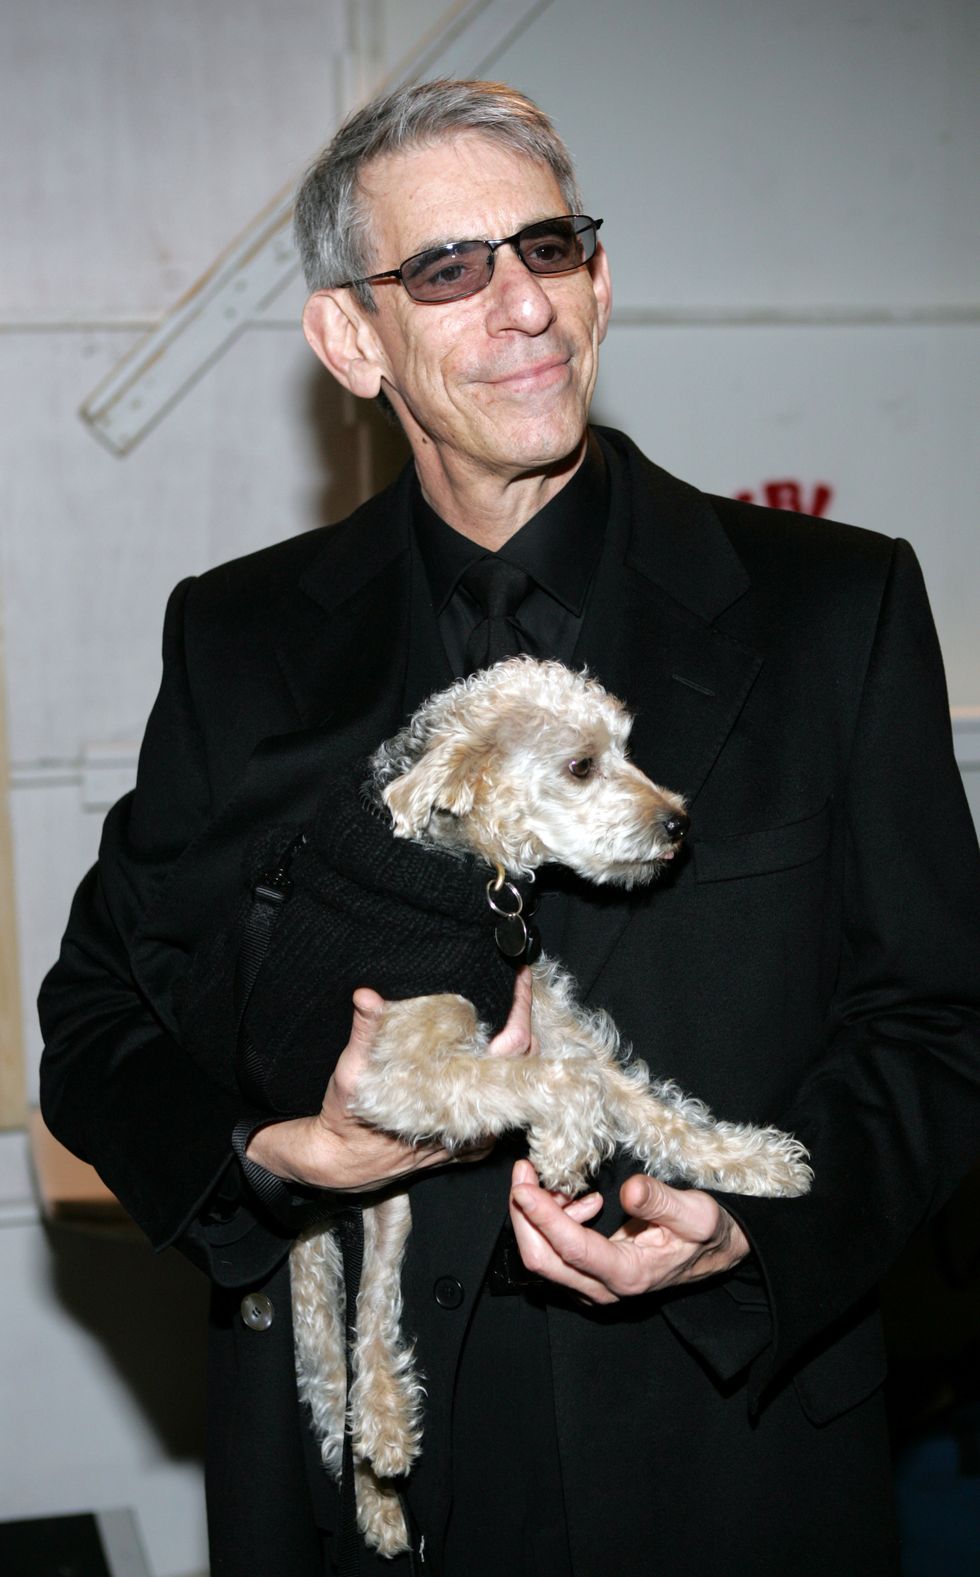 richard belzer during mercedes  benz fashion week fall 2007   marc bouwer   front row and backstage at the salon, bryant park in new york city, new york, united states photo by marc andrew deleyfilmmagic